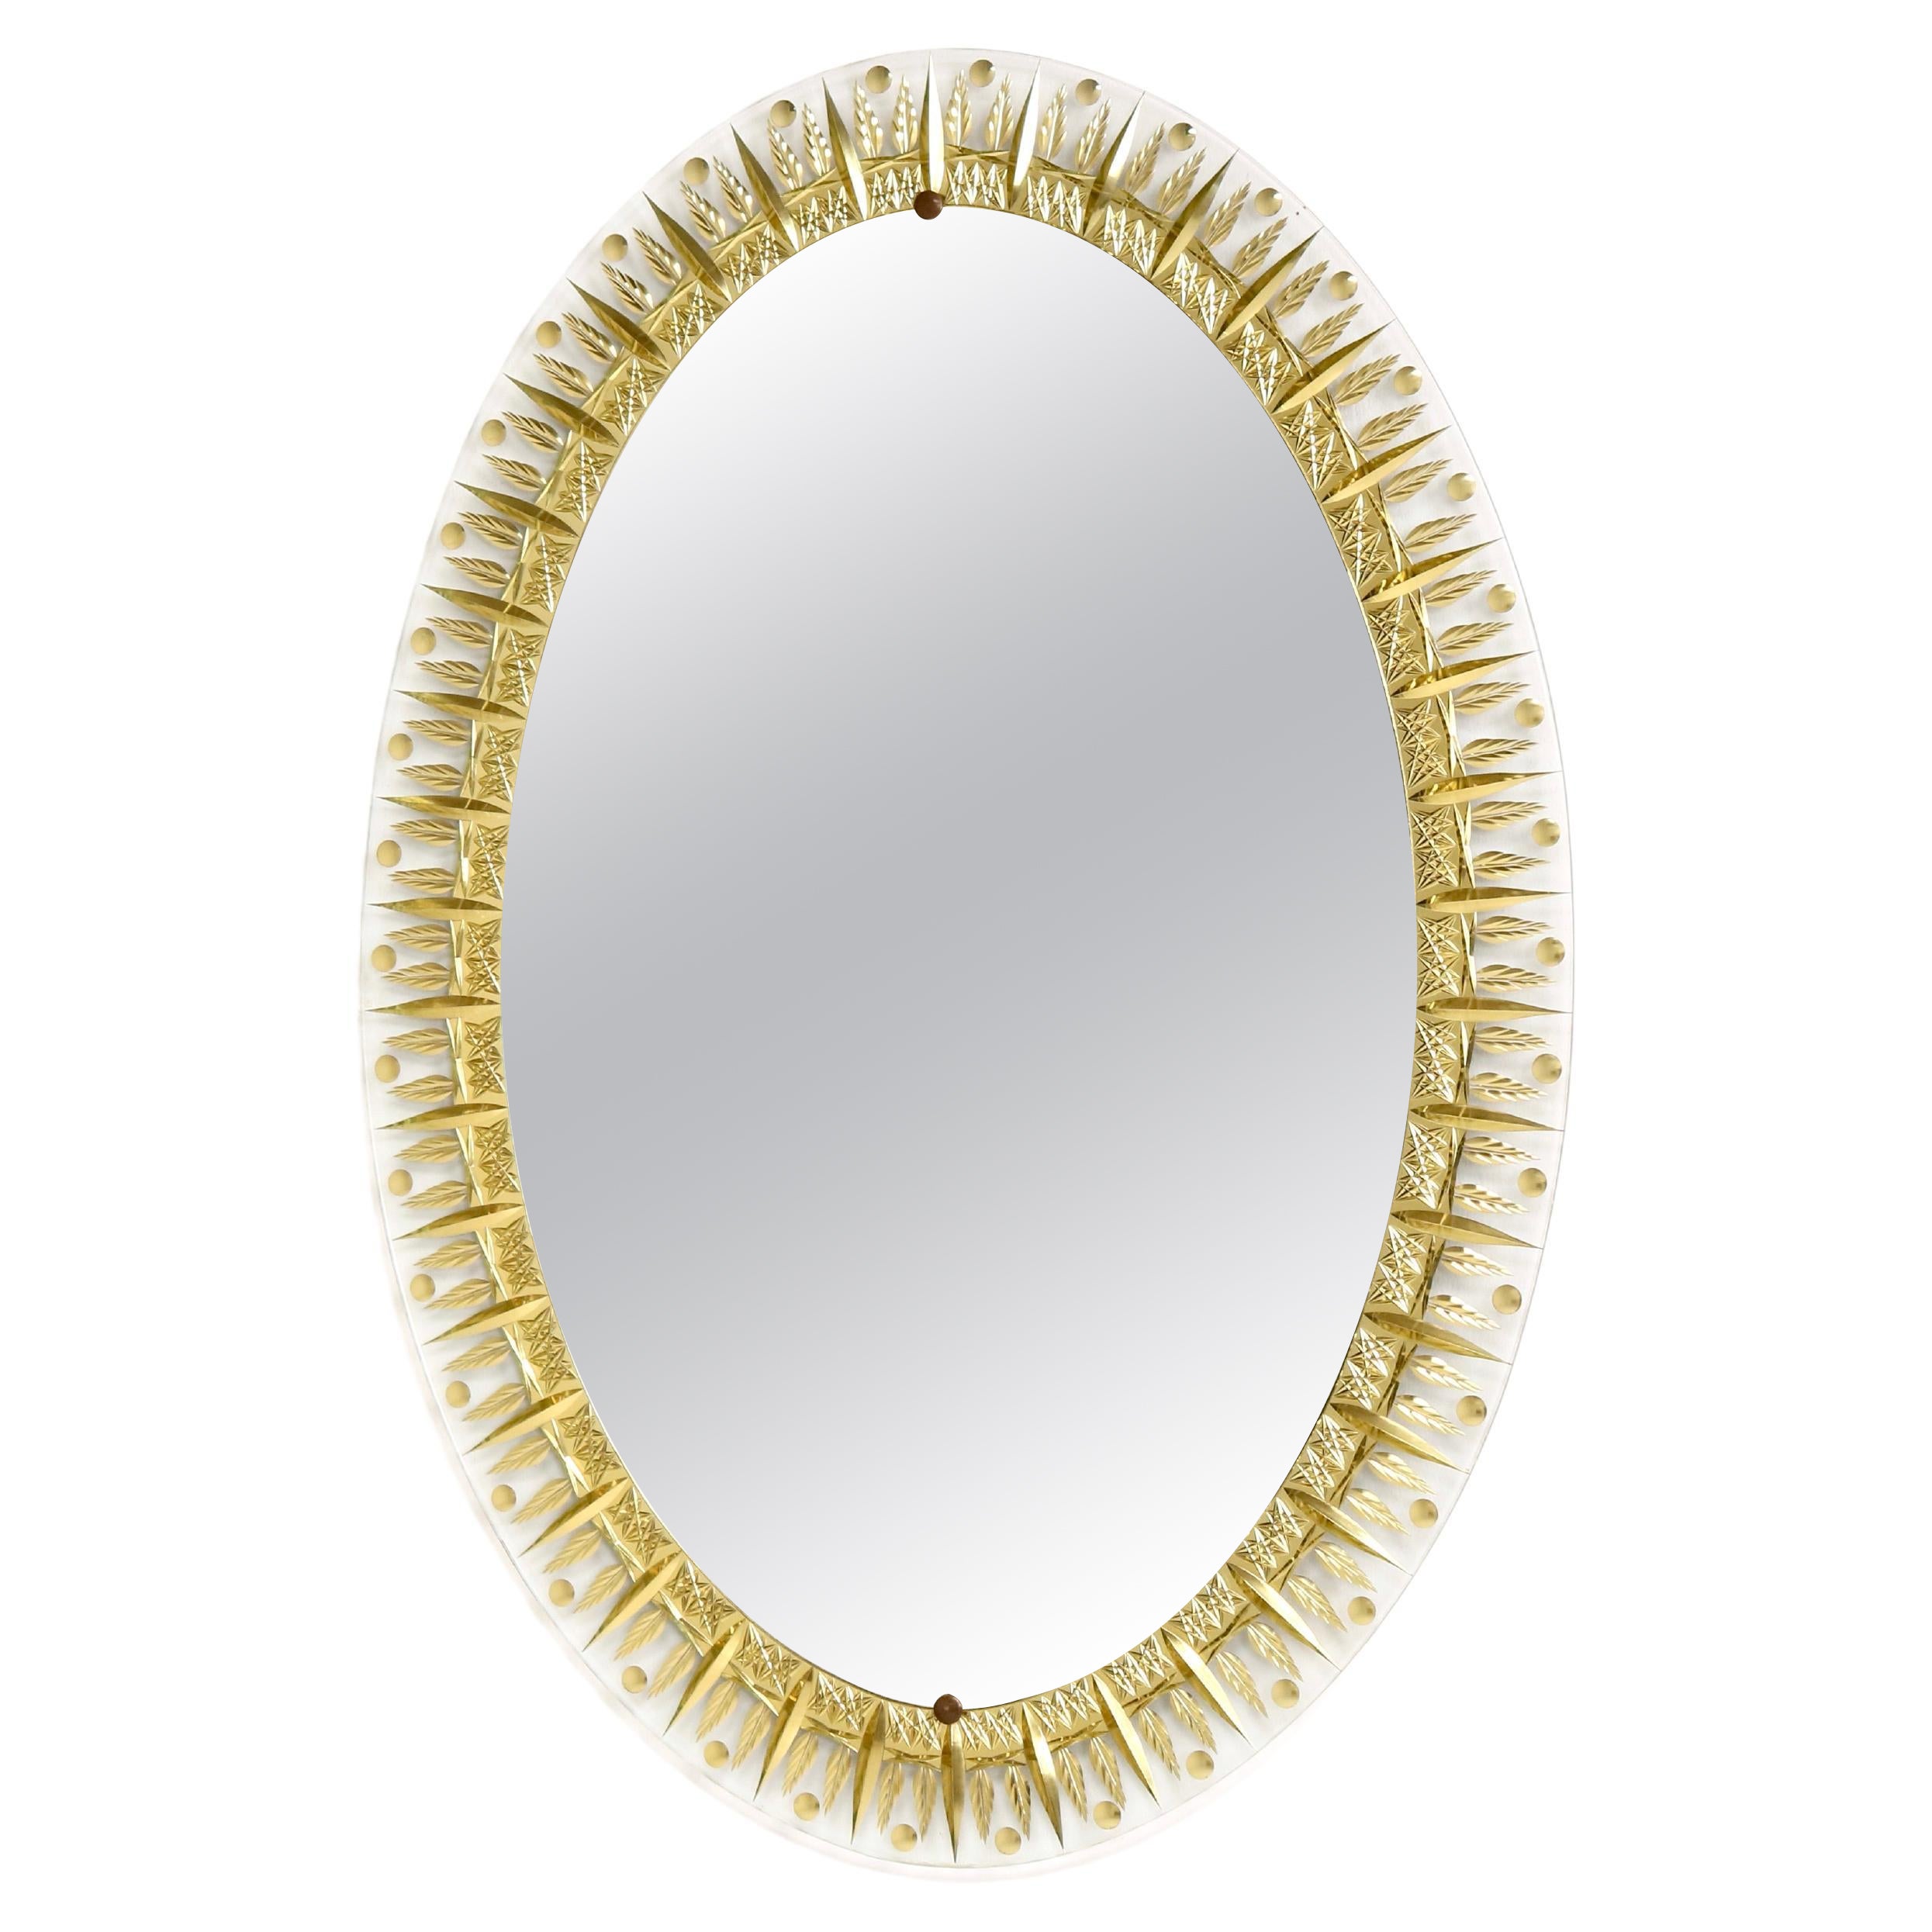 Cristal Art - Glass Mirror with lacquered gold details, Italian Design 1960s